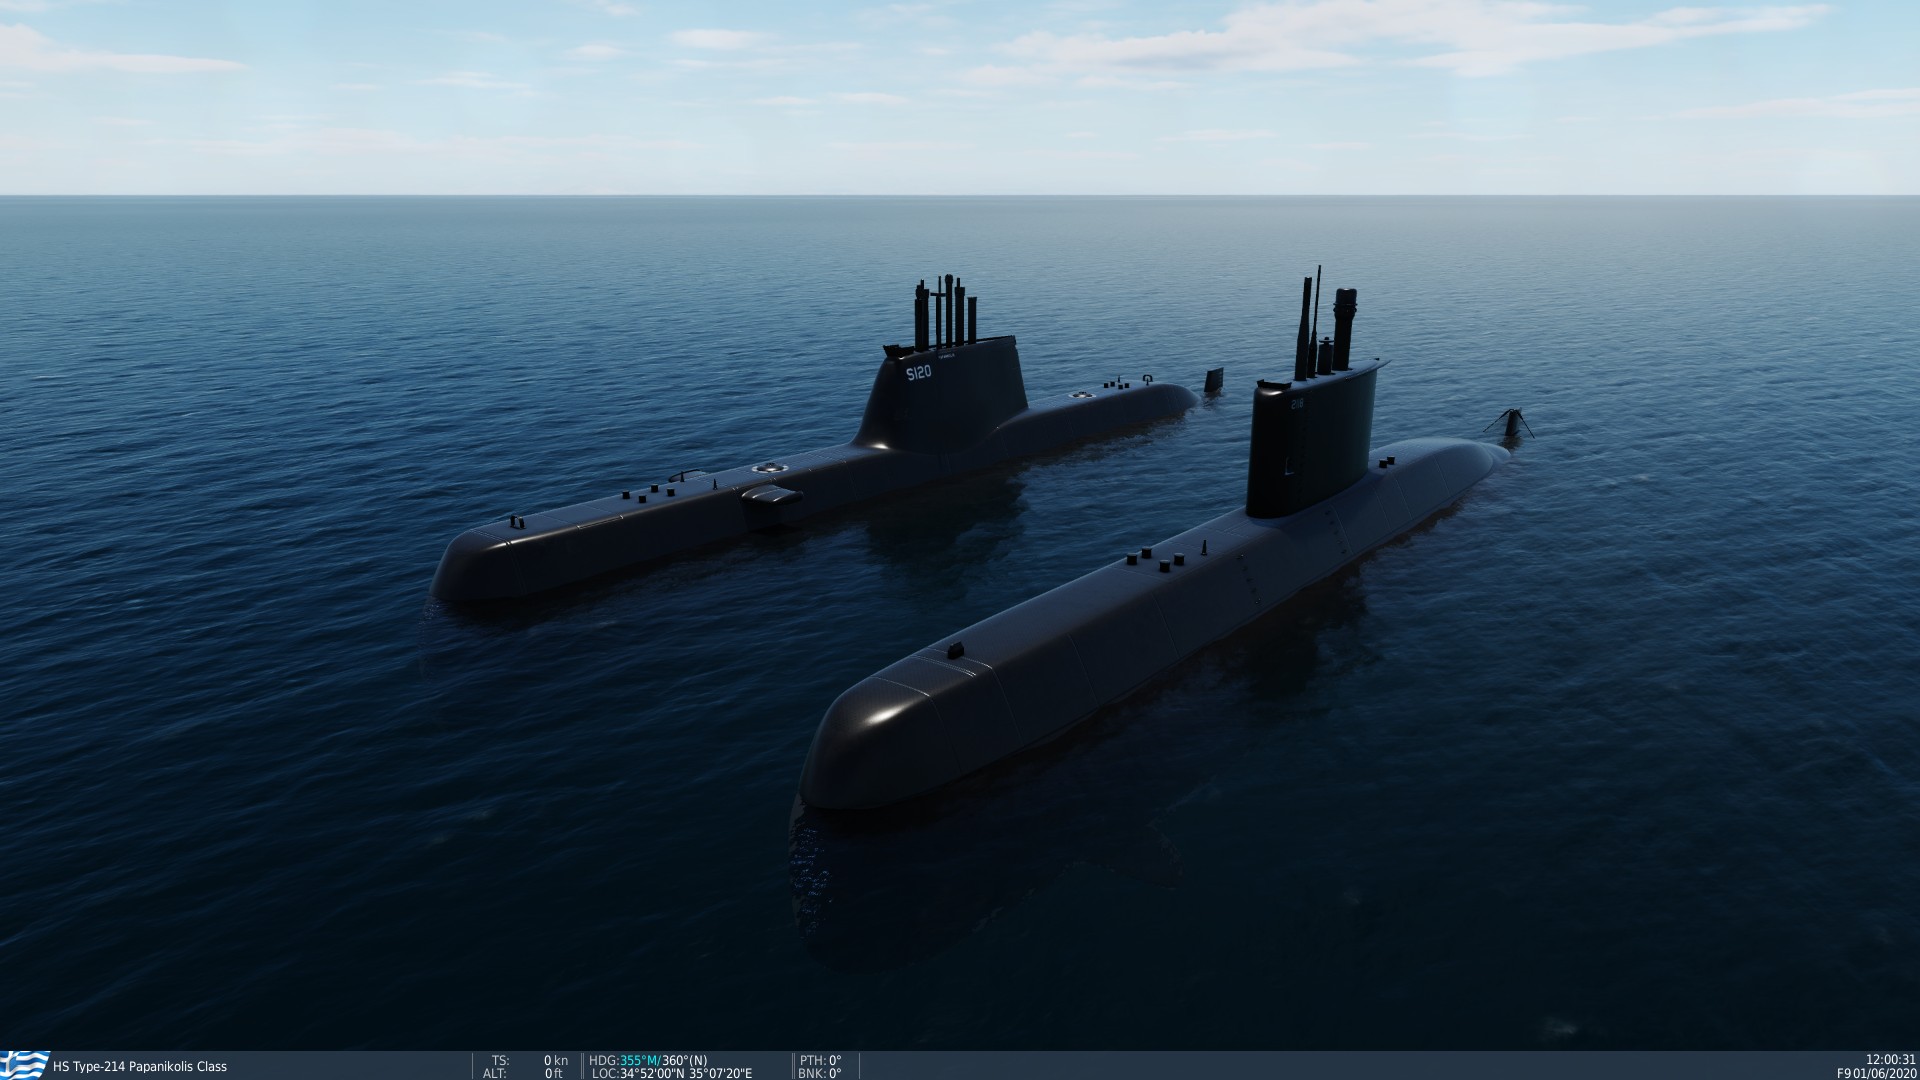 Submarines - Type209 and Type214 (both based on Greek versions) - UPDATED